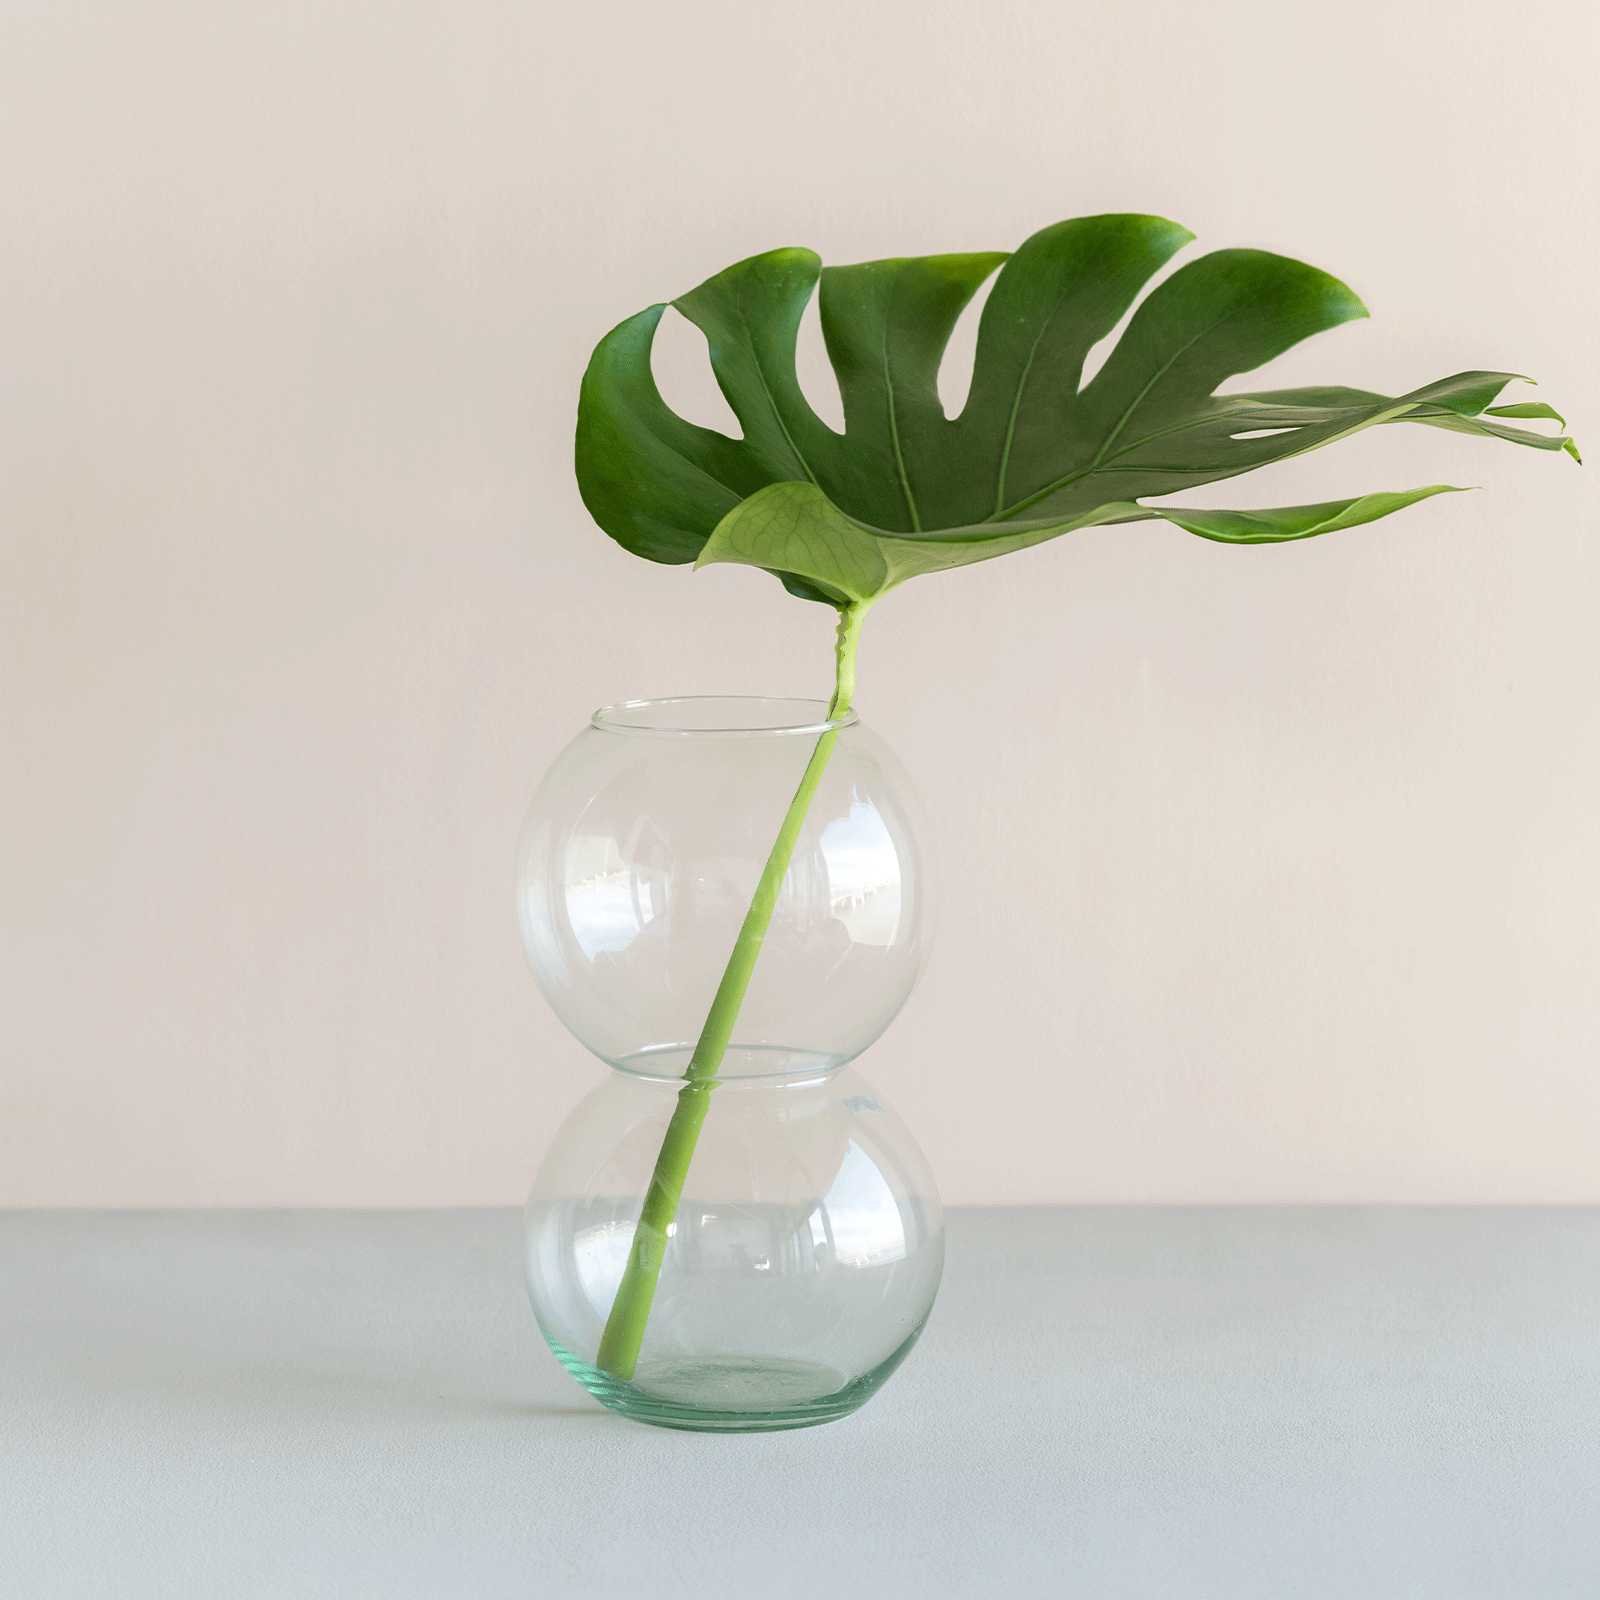 Bulb recycled glass vase